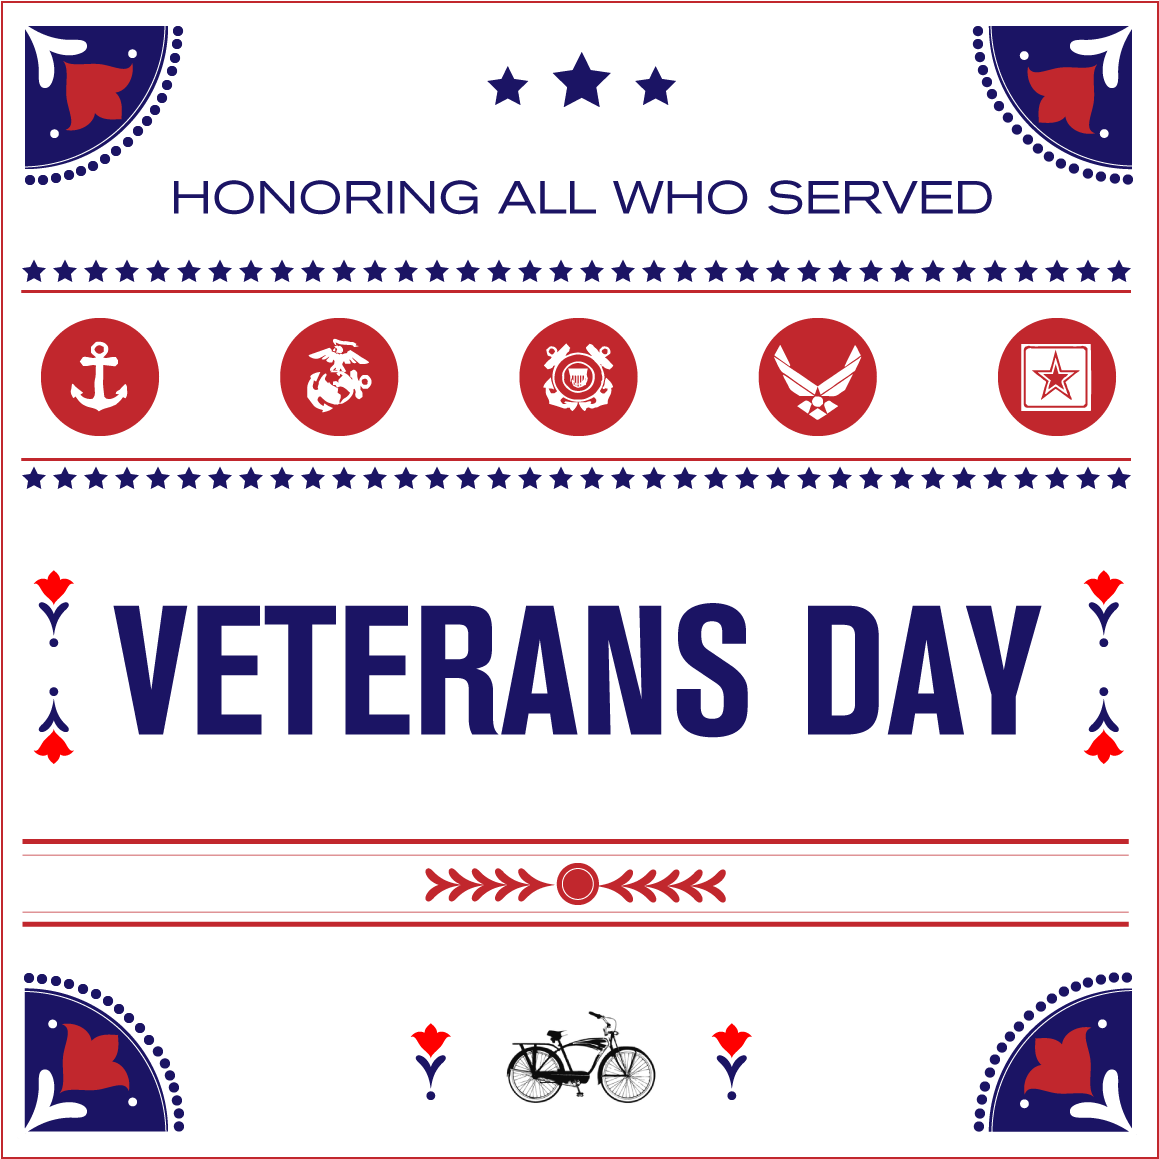 Veterans Day Honoring All Who Served Poster PNG